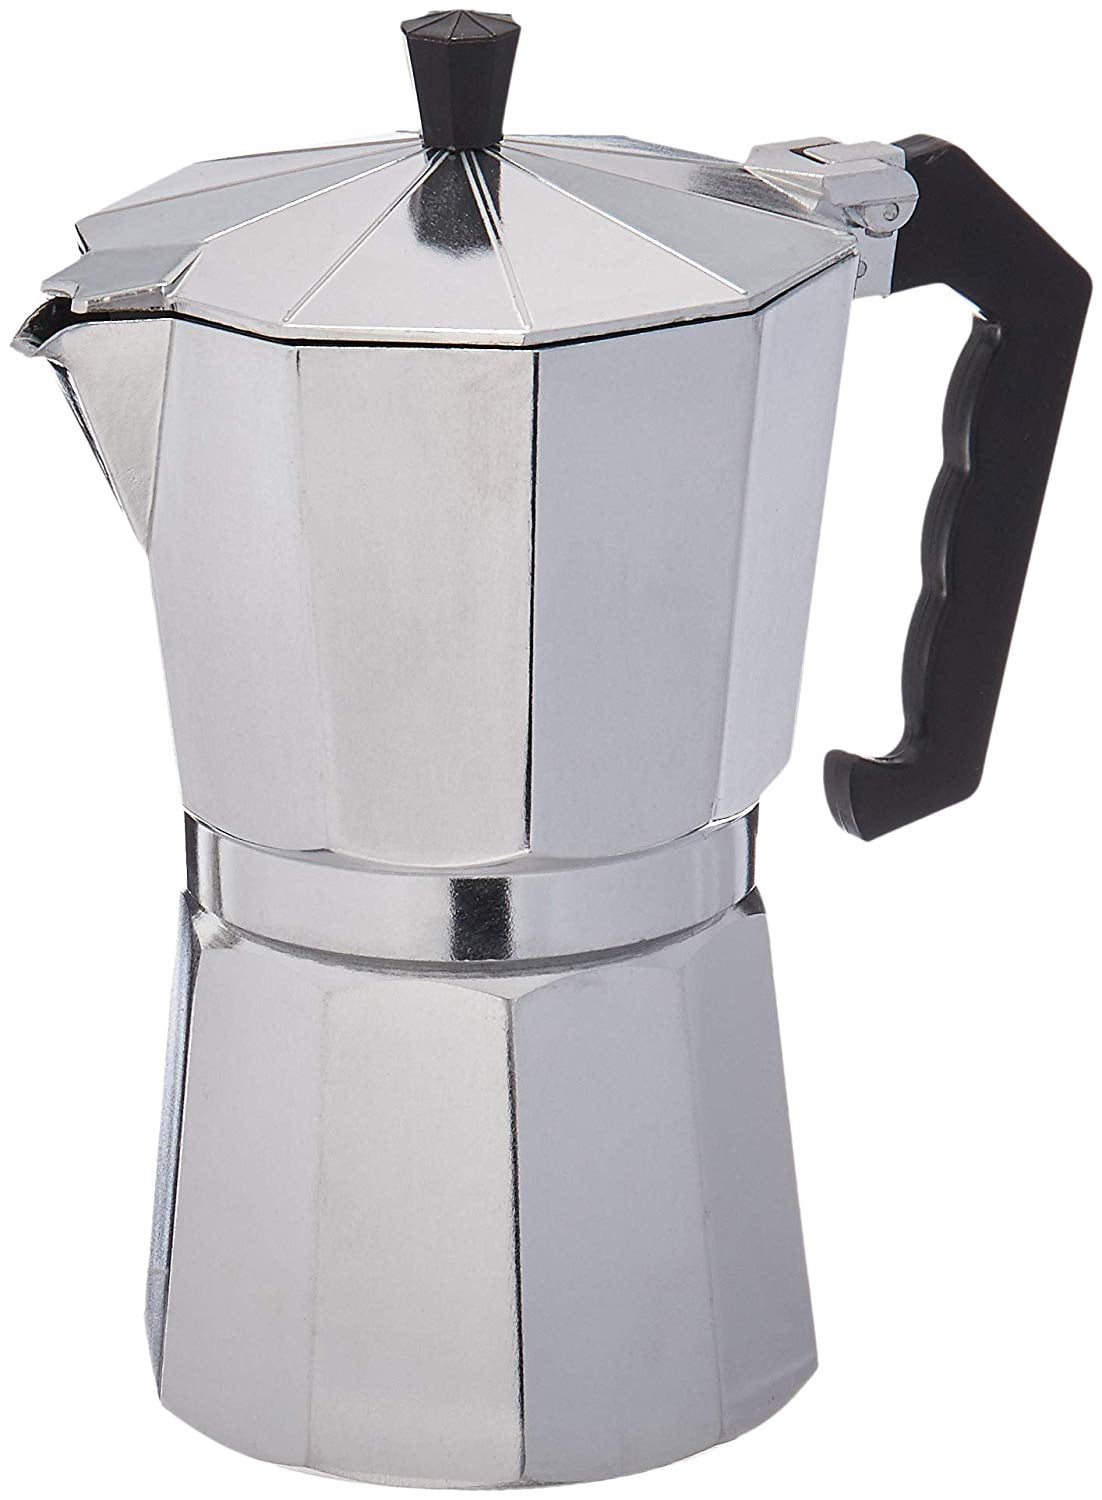 Easyworkz Diego 12 Cup Stovetop Espresso Maker Stainless Steel Italian  Coffee Maker Induction Moka Pot Black, 17.5 oz 